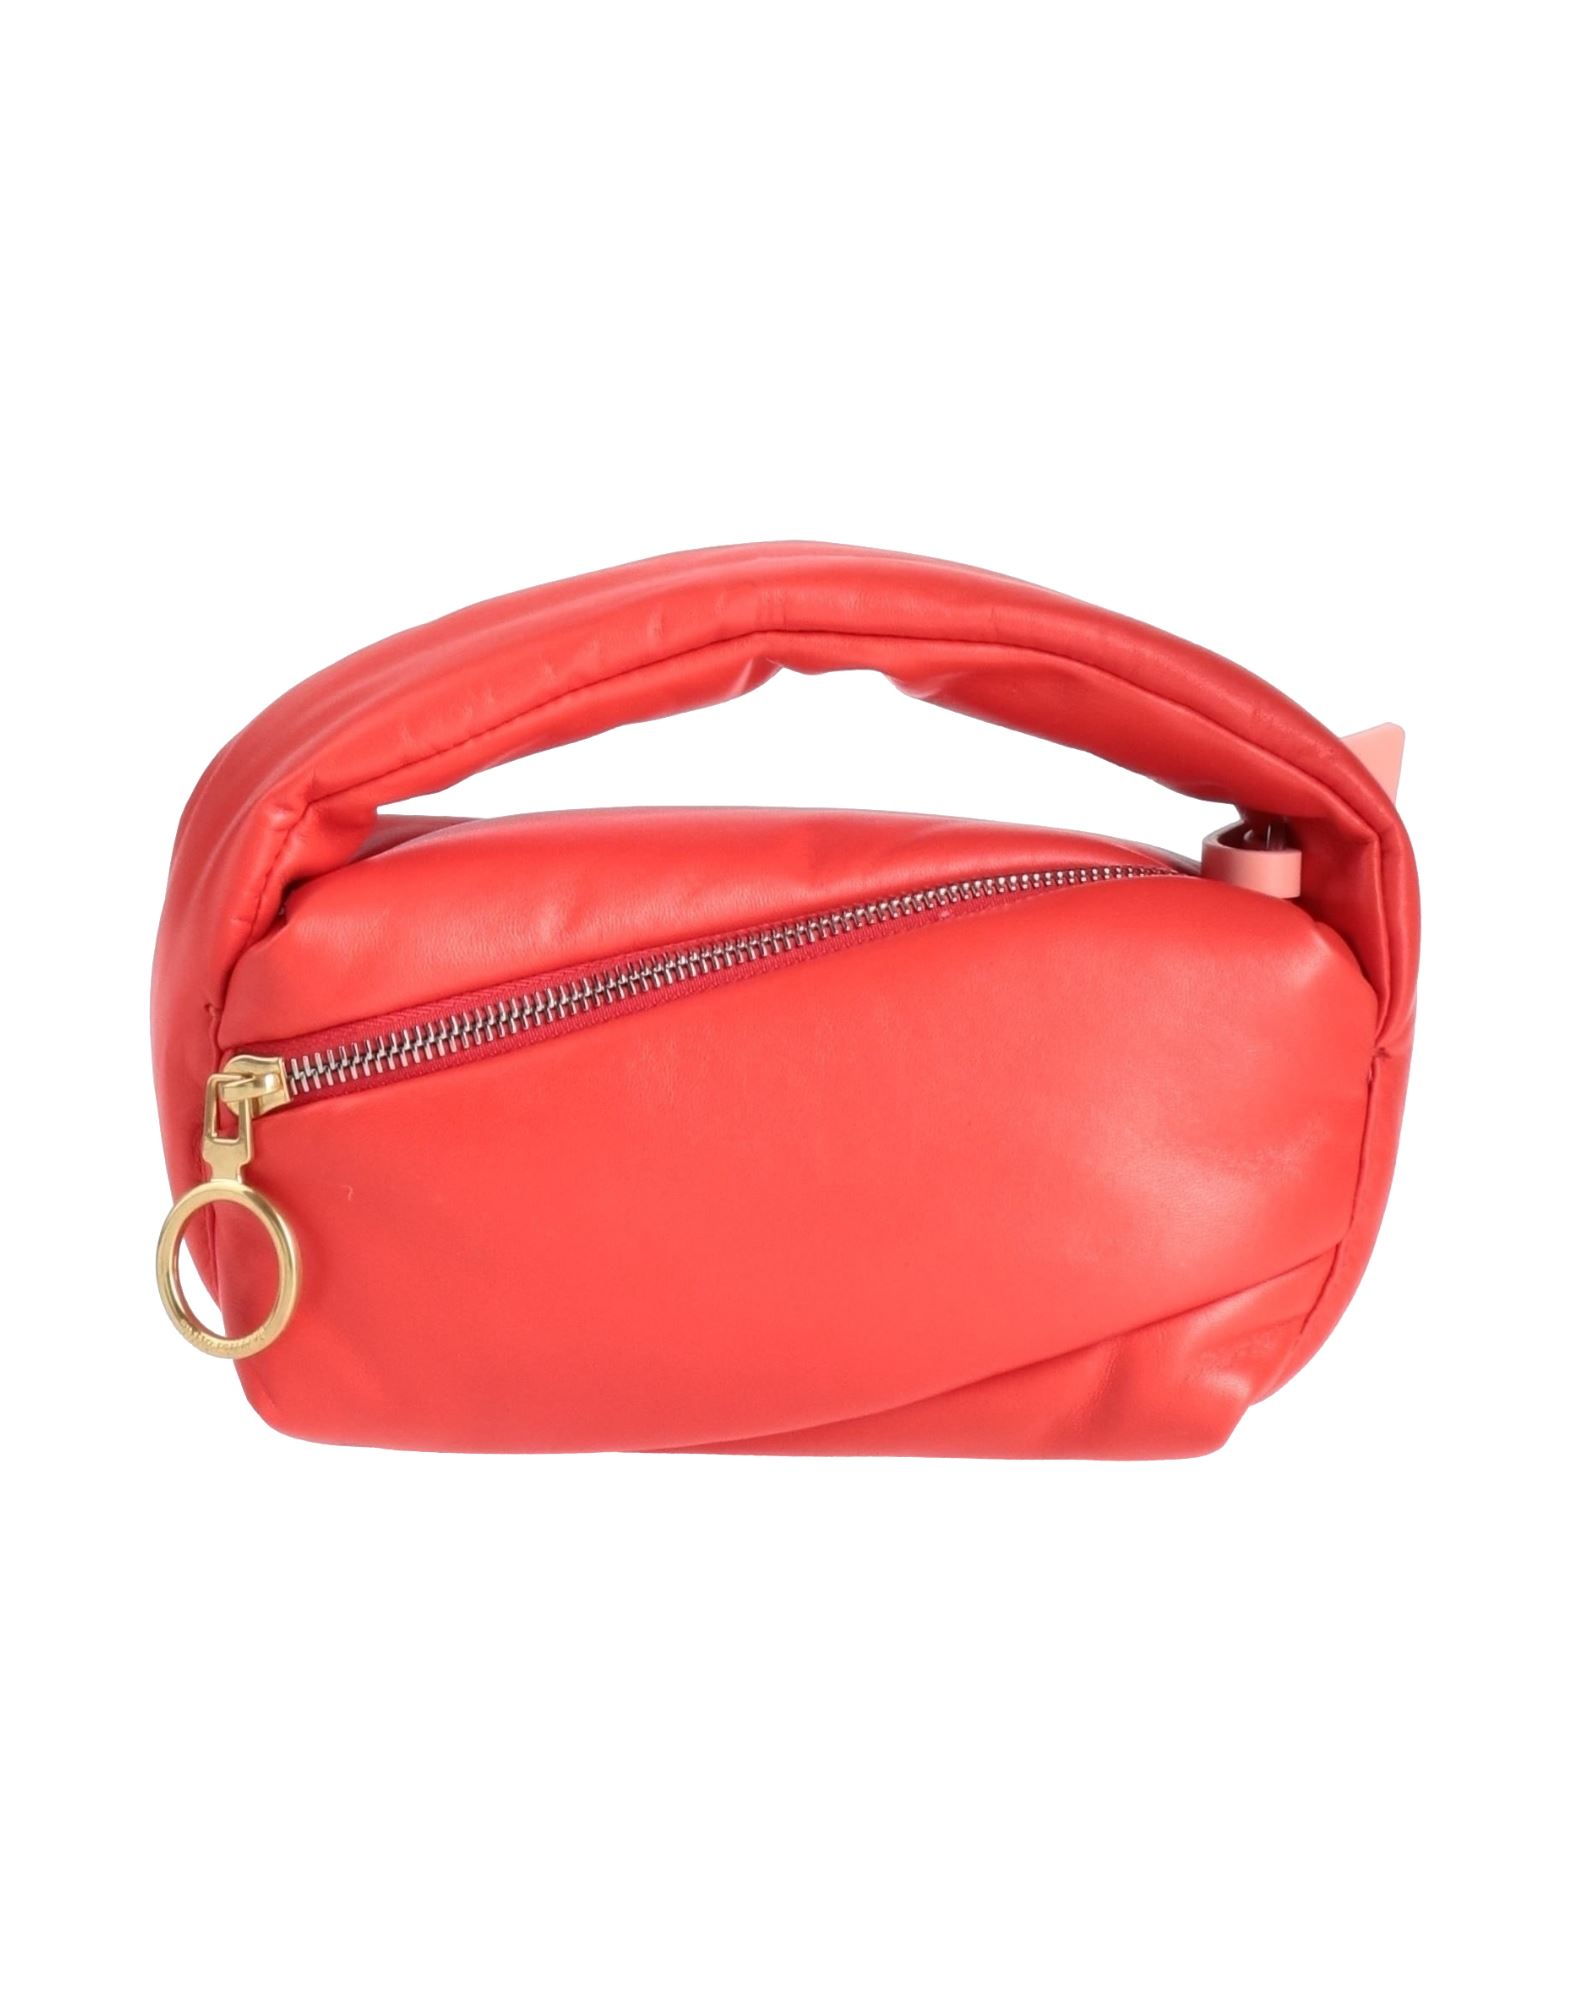 OFF-WHITE OFF-WHITE WOMAN HANDBAG RED SIZE - SOFT LEATHER